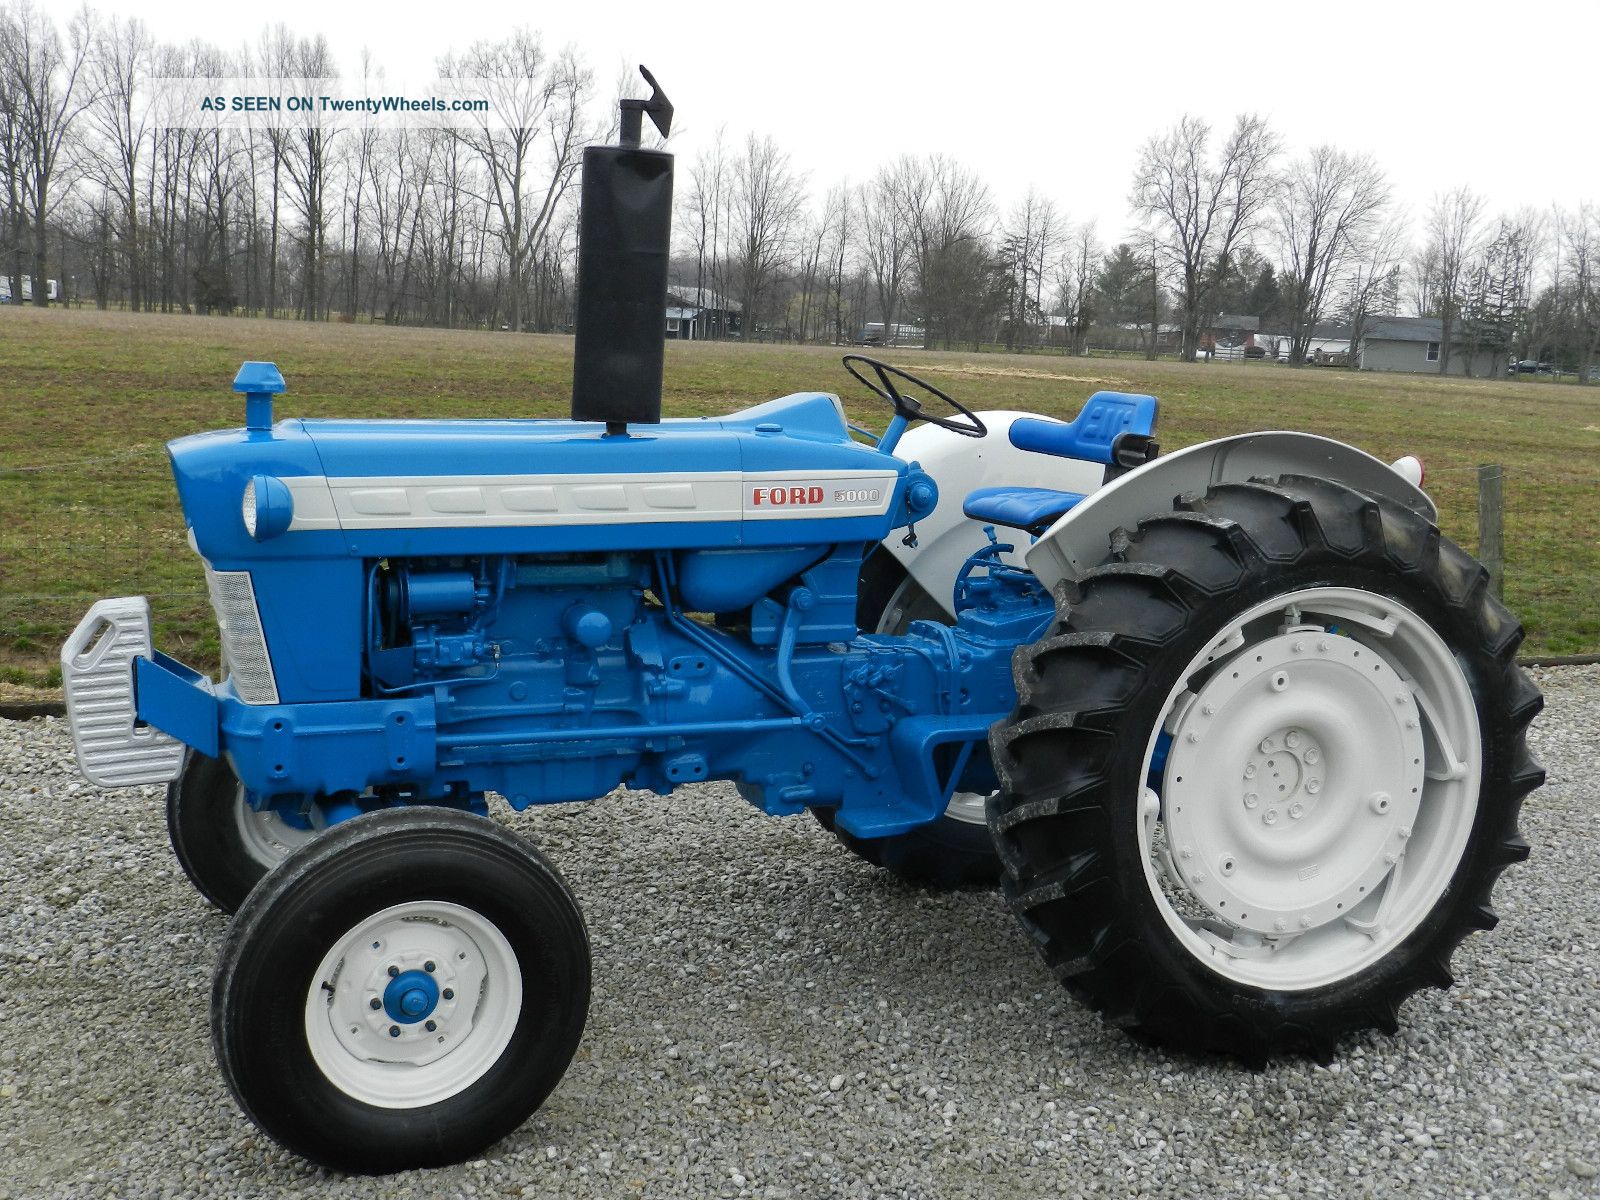 Ford 5000 Tractor - Diesel - Restored - Sharp Tractors photo